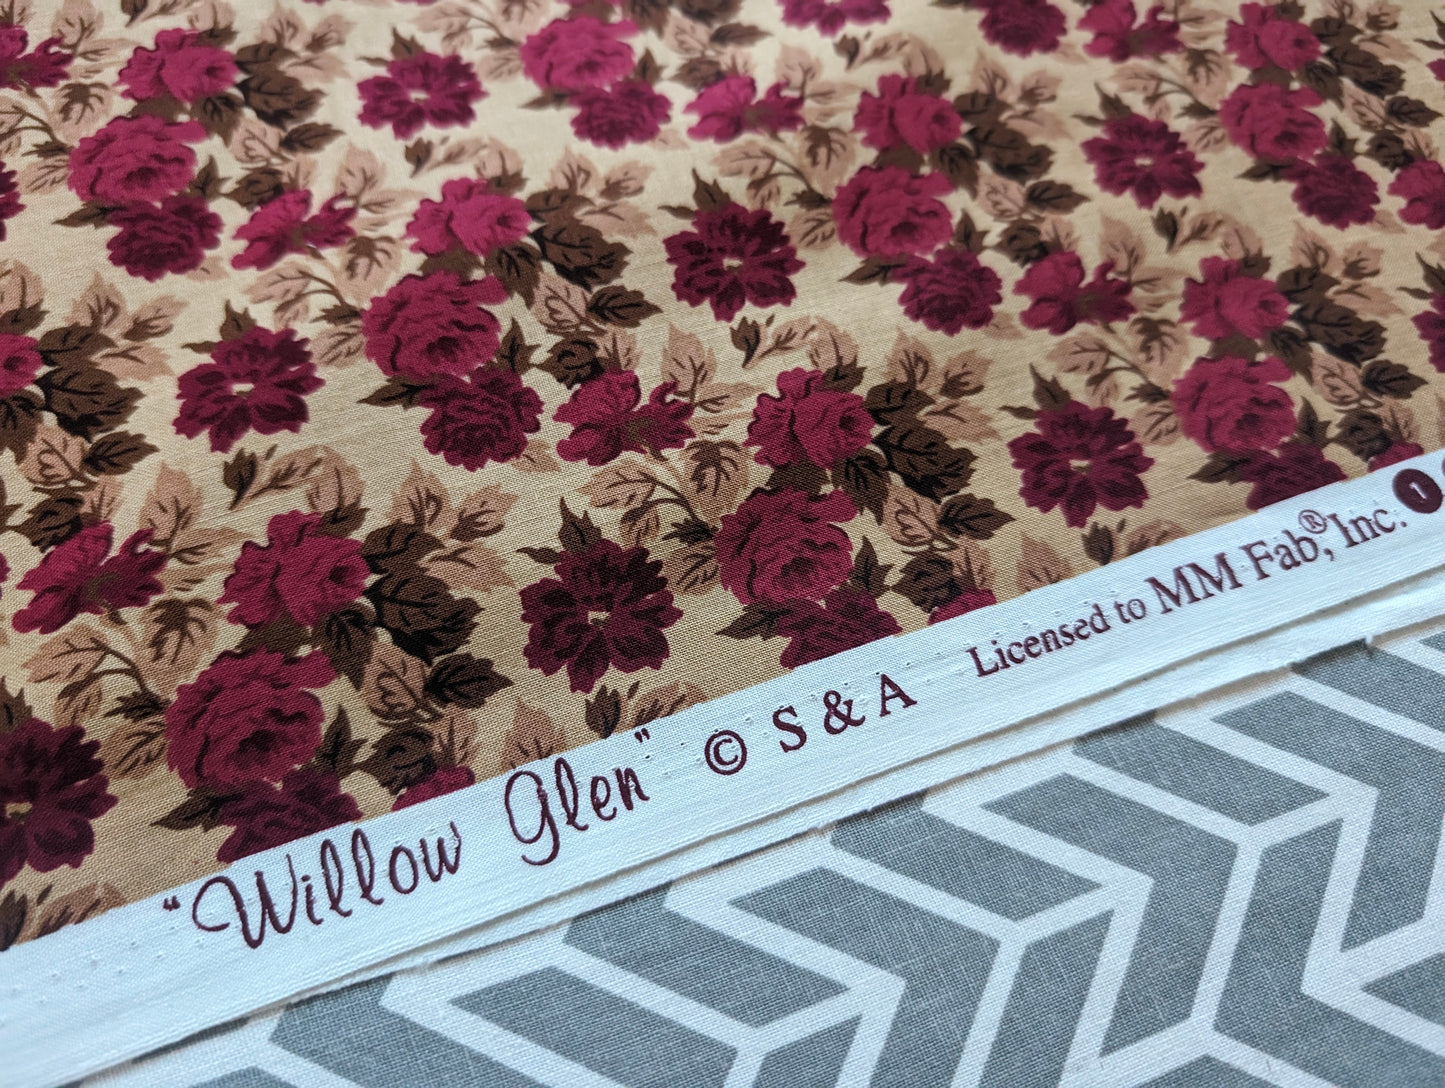 Vintage Fabric - "Willow Glen" Cotton Roses by MM Lab Inc.